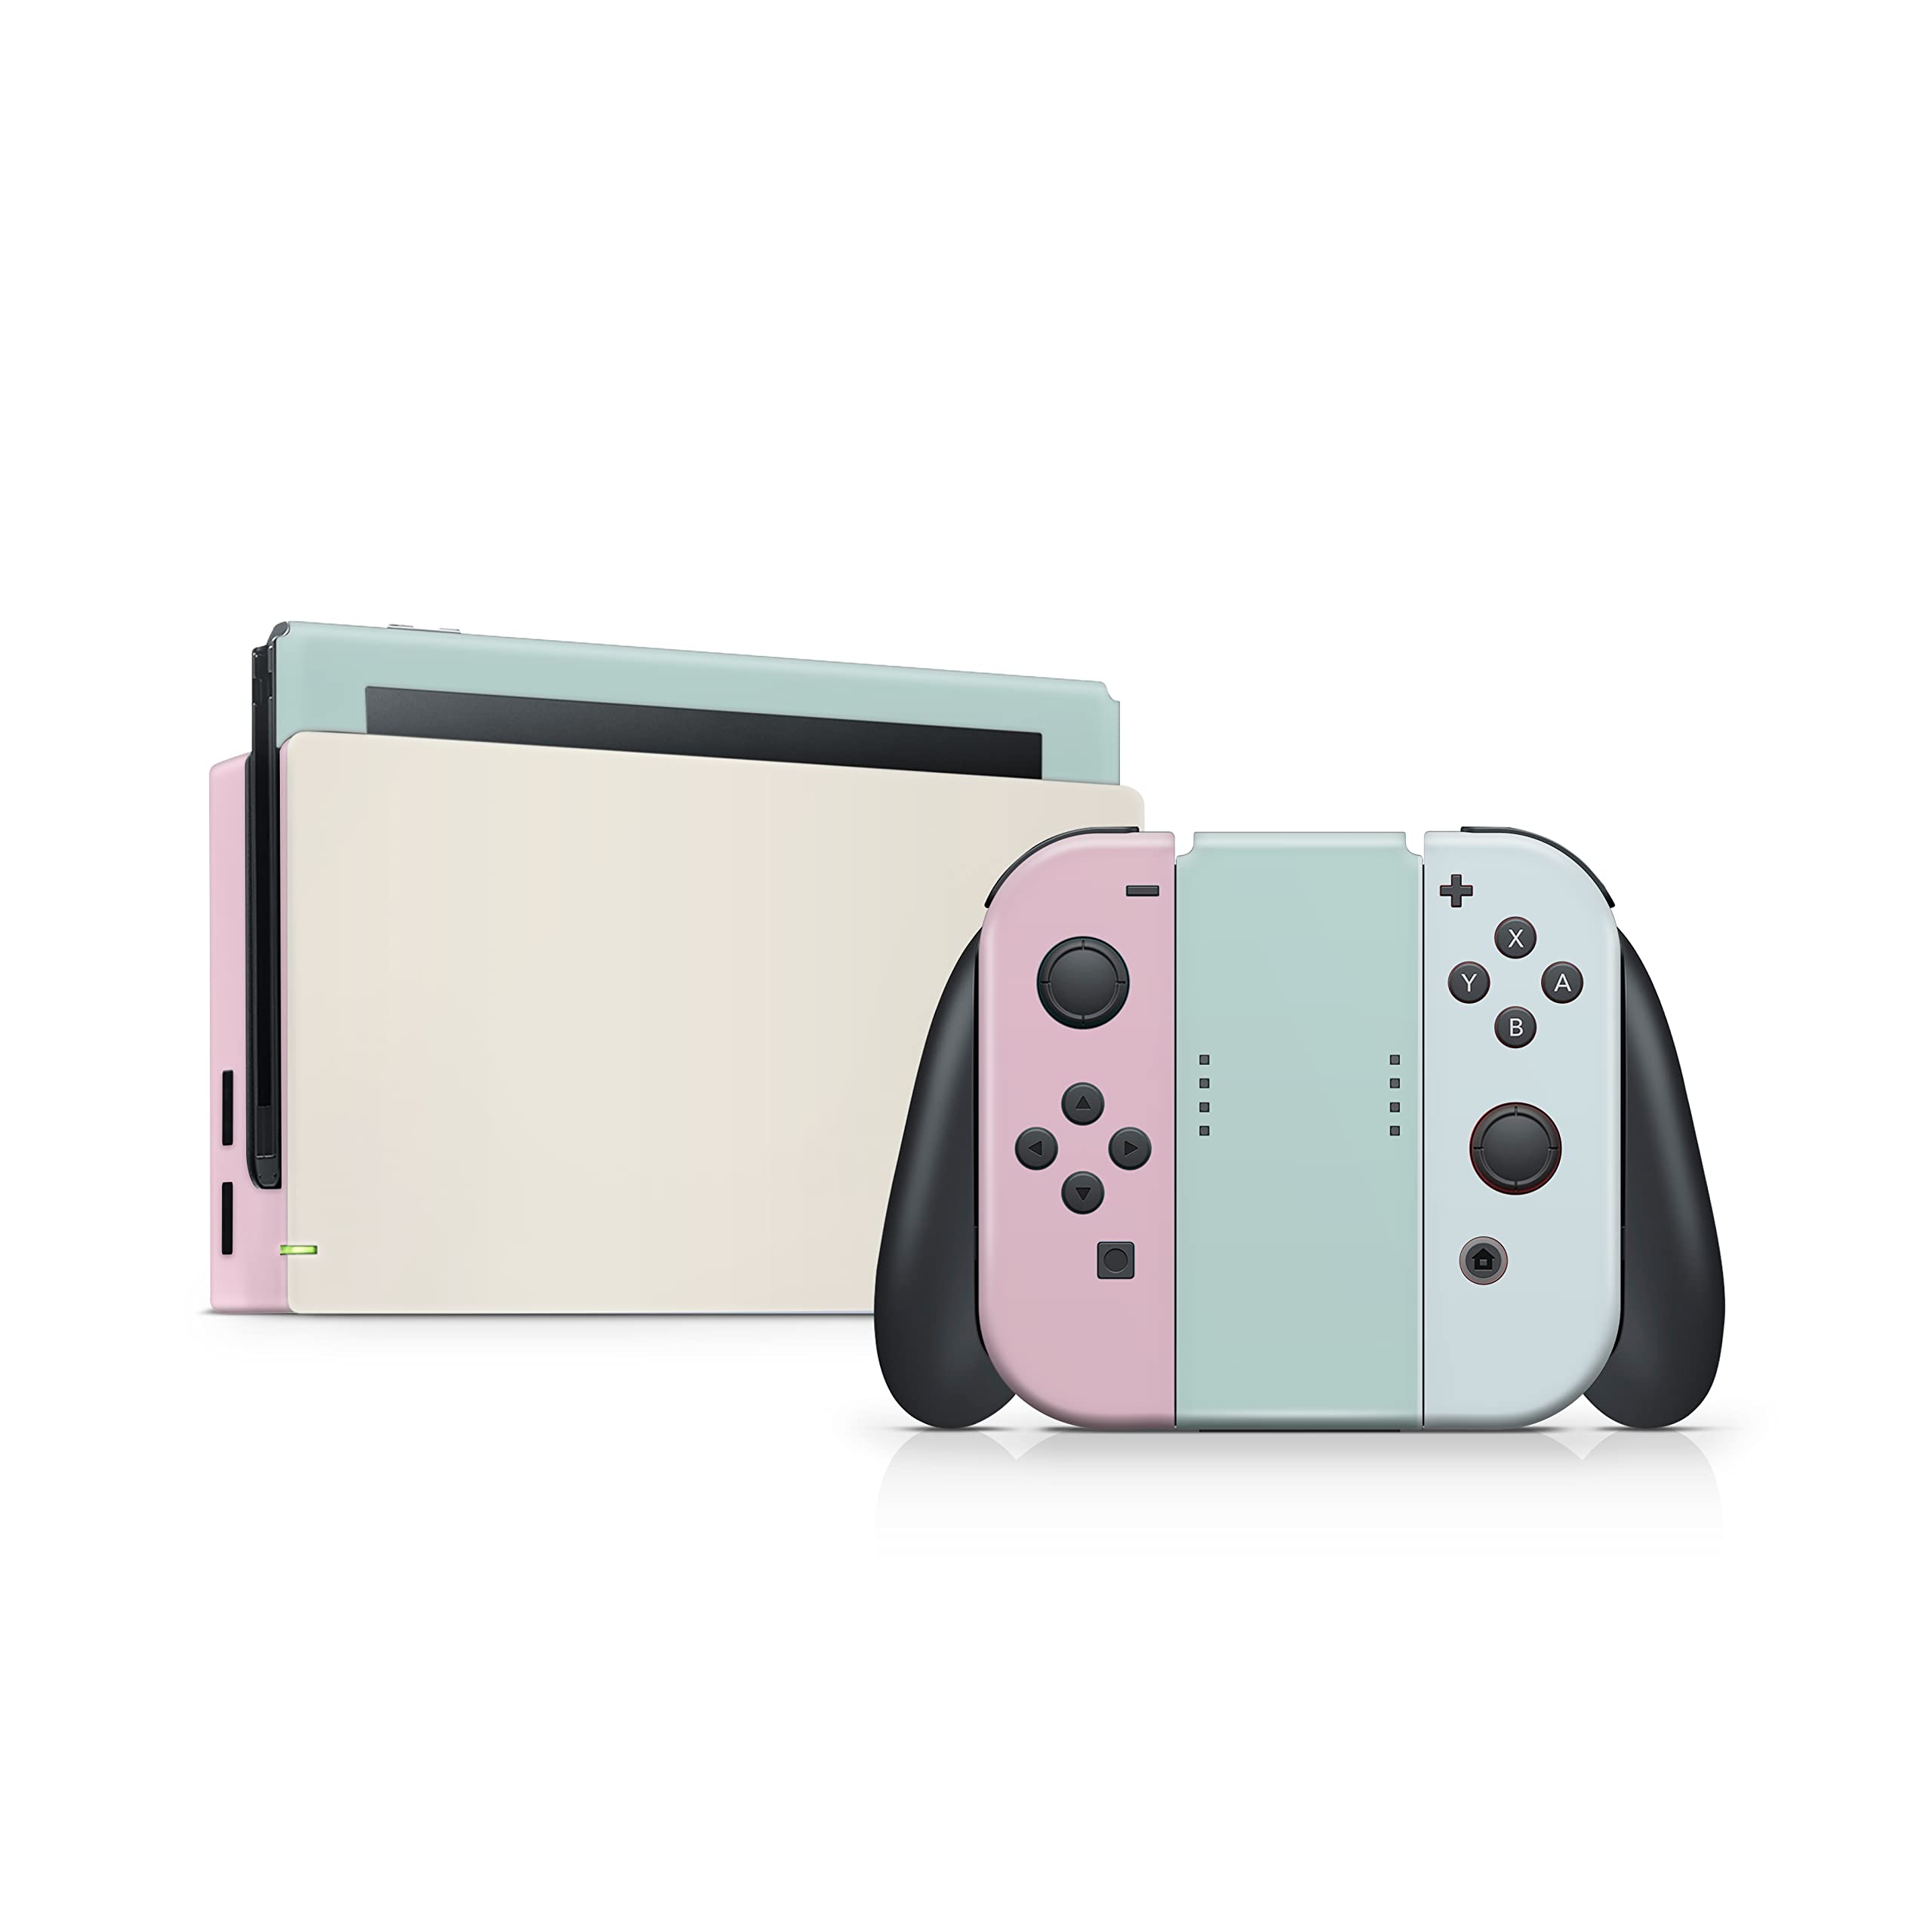 Tacky Design Colorwave Skin Compatible with Nintendo Switch Skin - Premium Vinyl 3M Blue Pastel Stickers Set - Switch Skin Compatible with Joy Con, Console, Dock, Decal Full Wrap